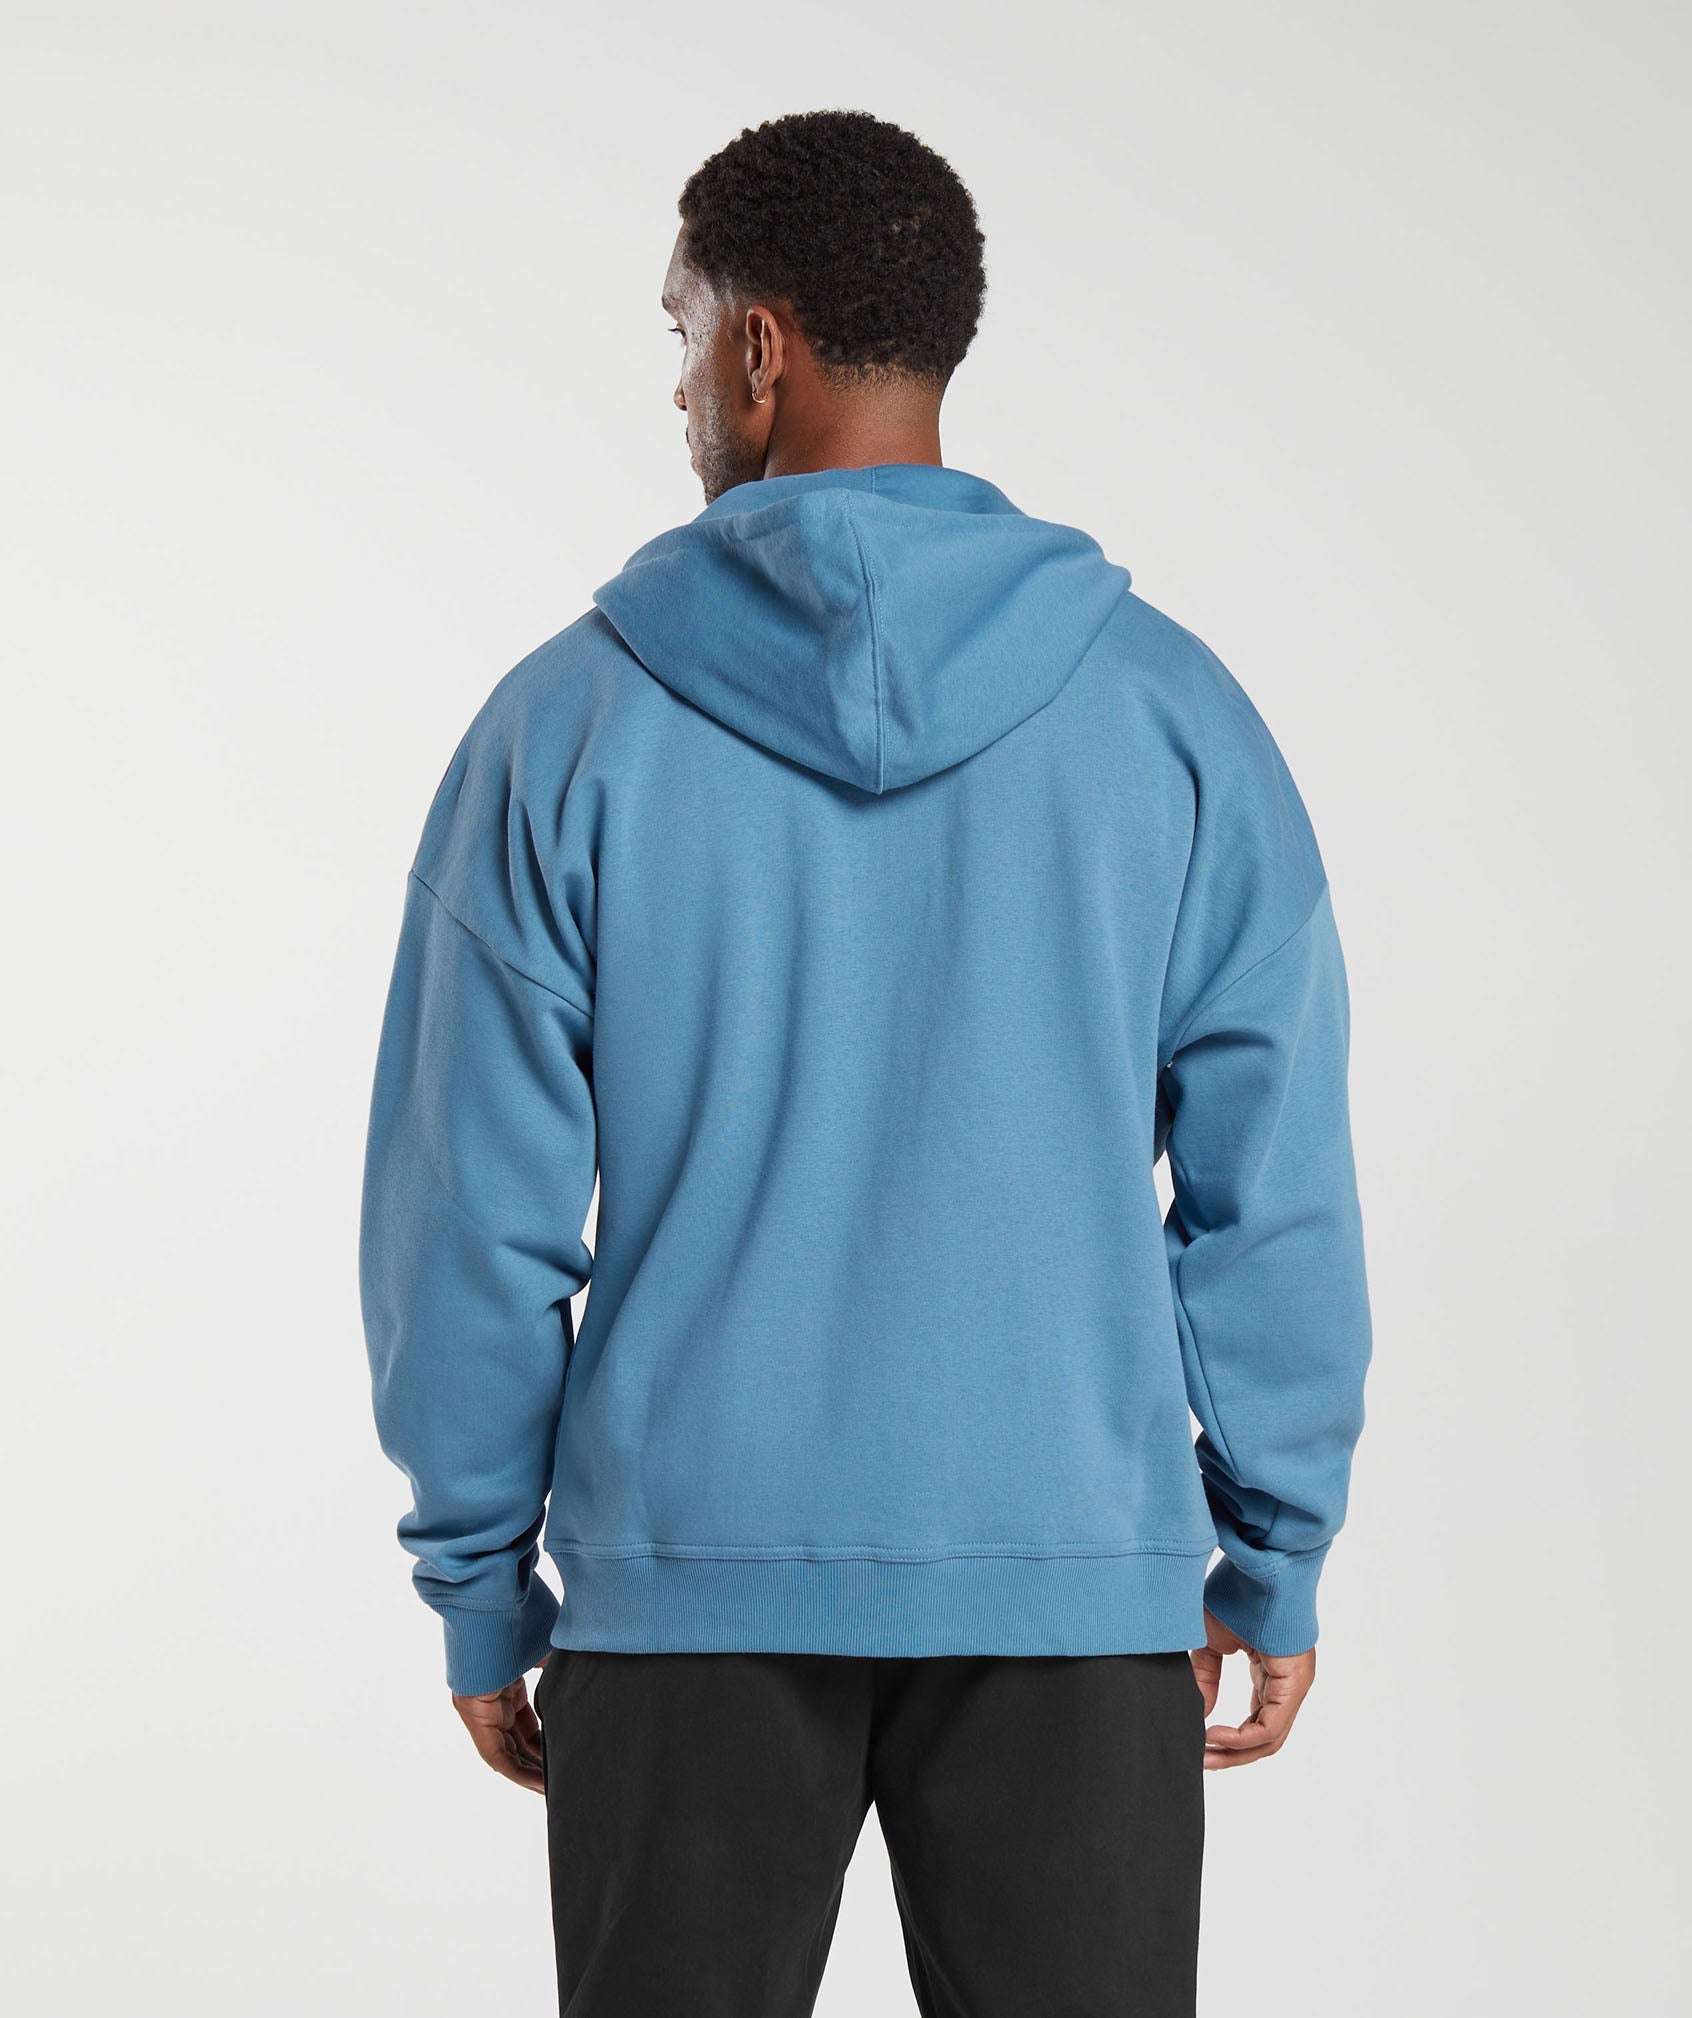 Gymshark Zip Up Men's Hoodie Grey/Blue - Size Small – PoppinTags